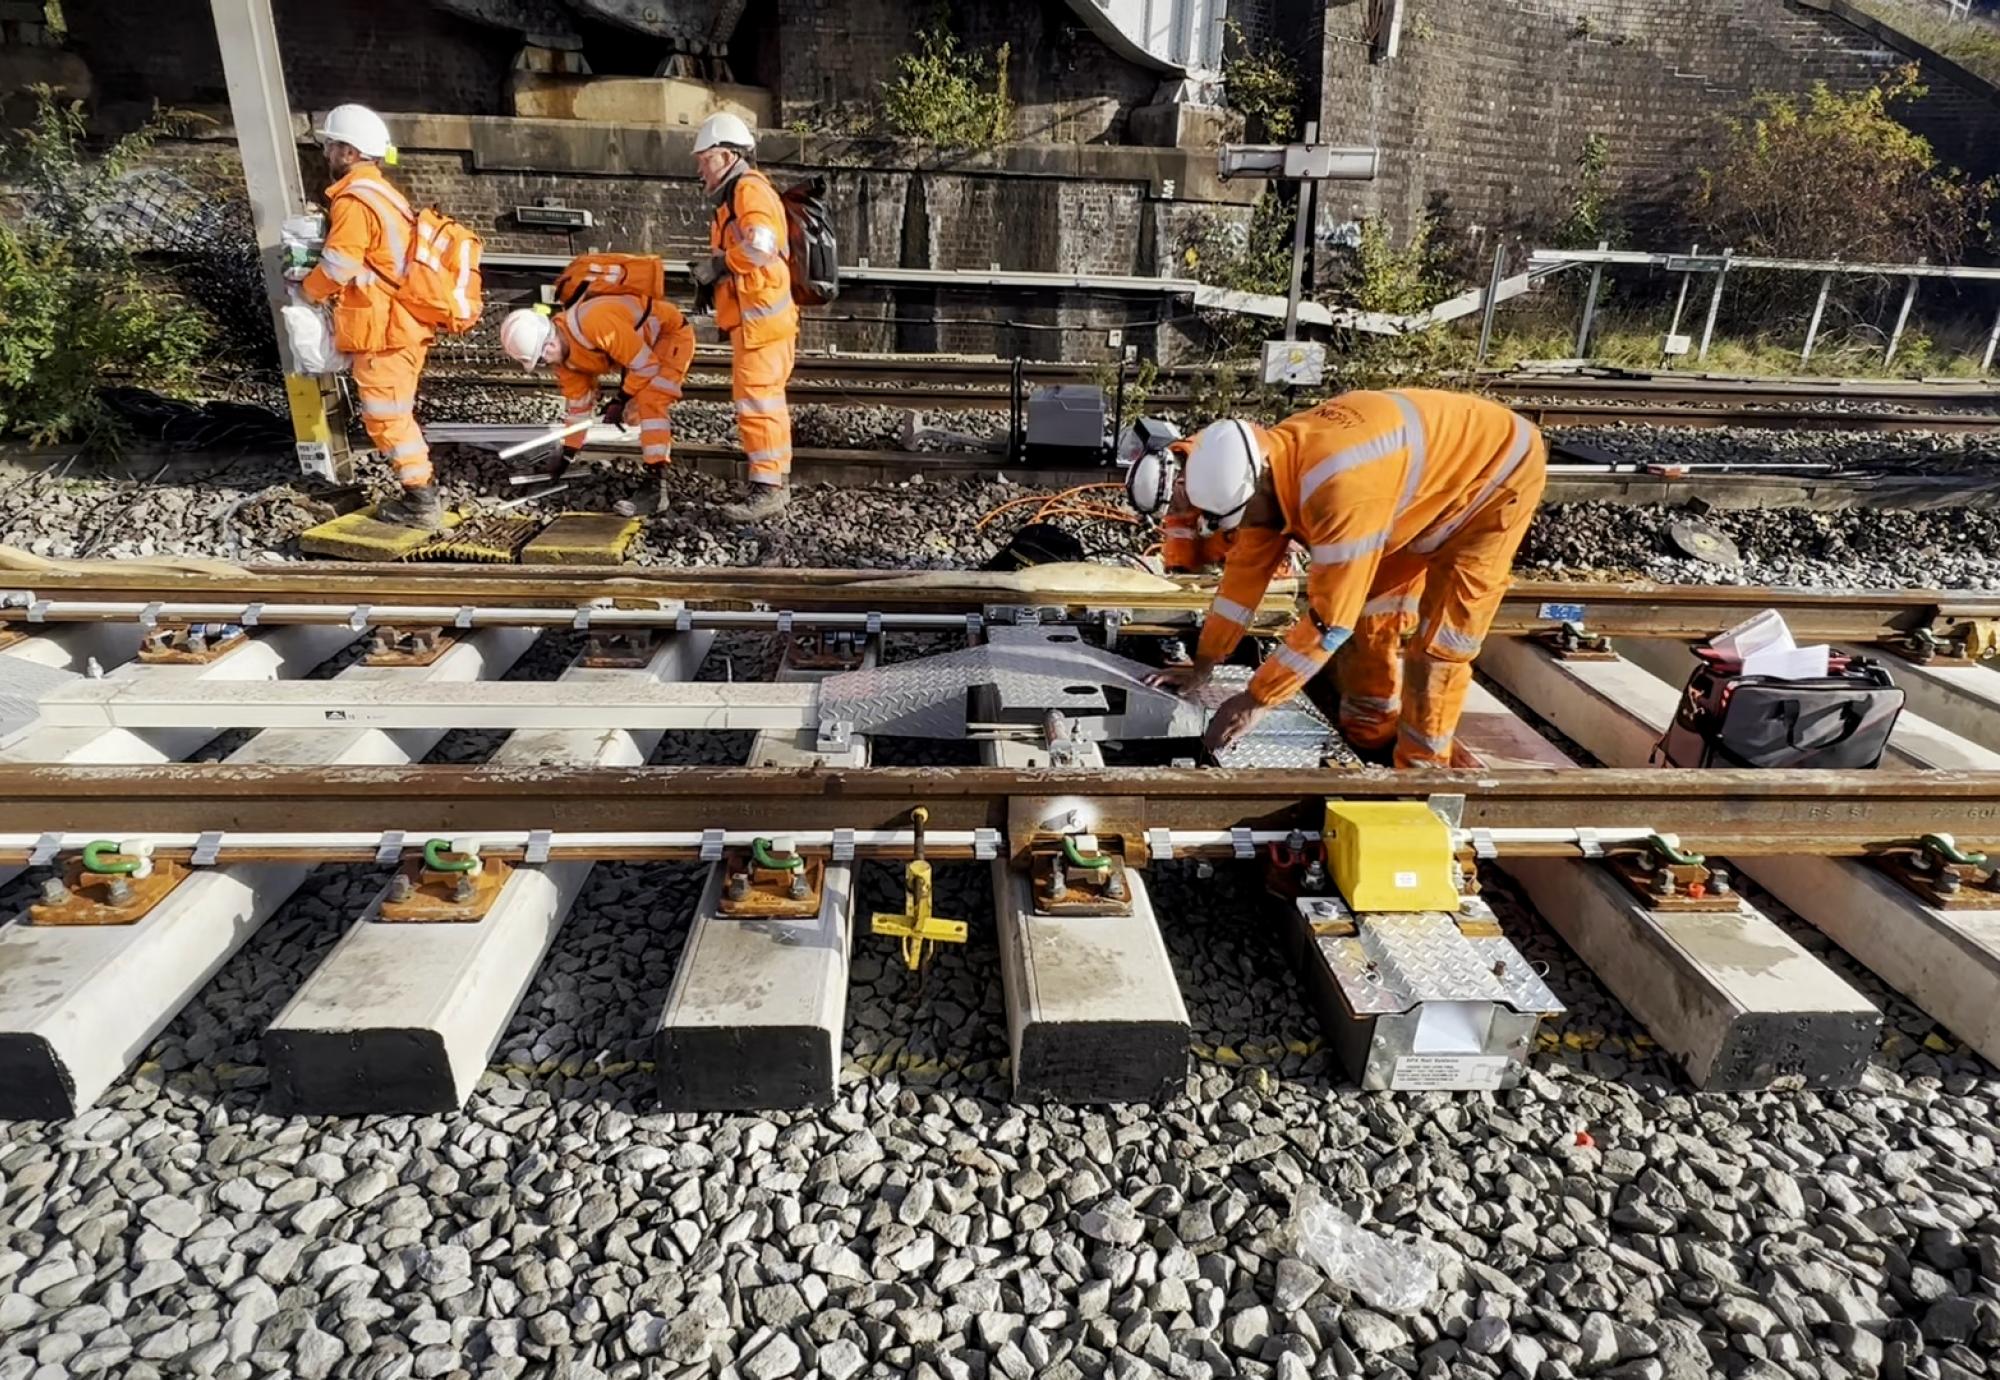 Network Rail engineers working on new track during Trent Valley line upgrade October 2022, via Network Rail 